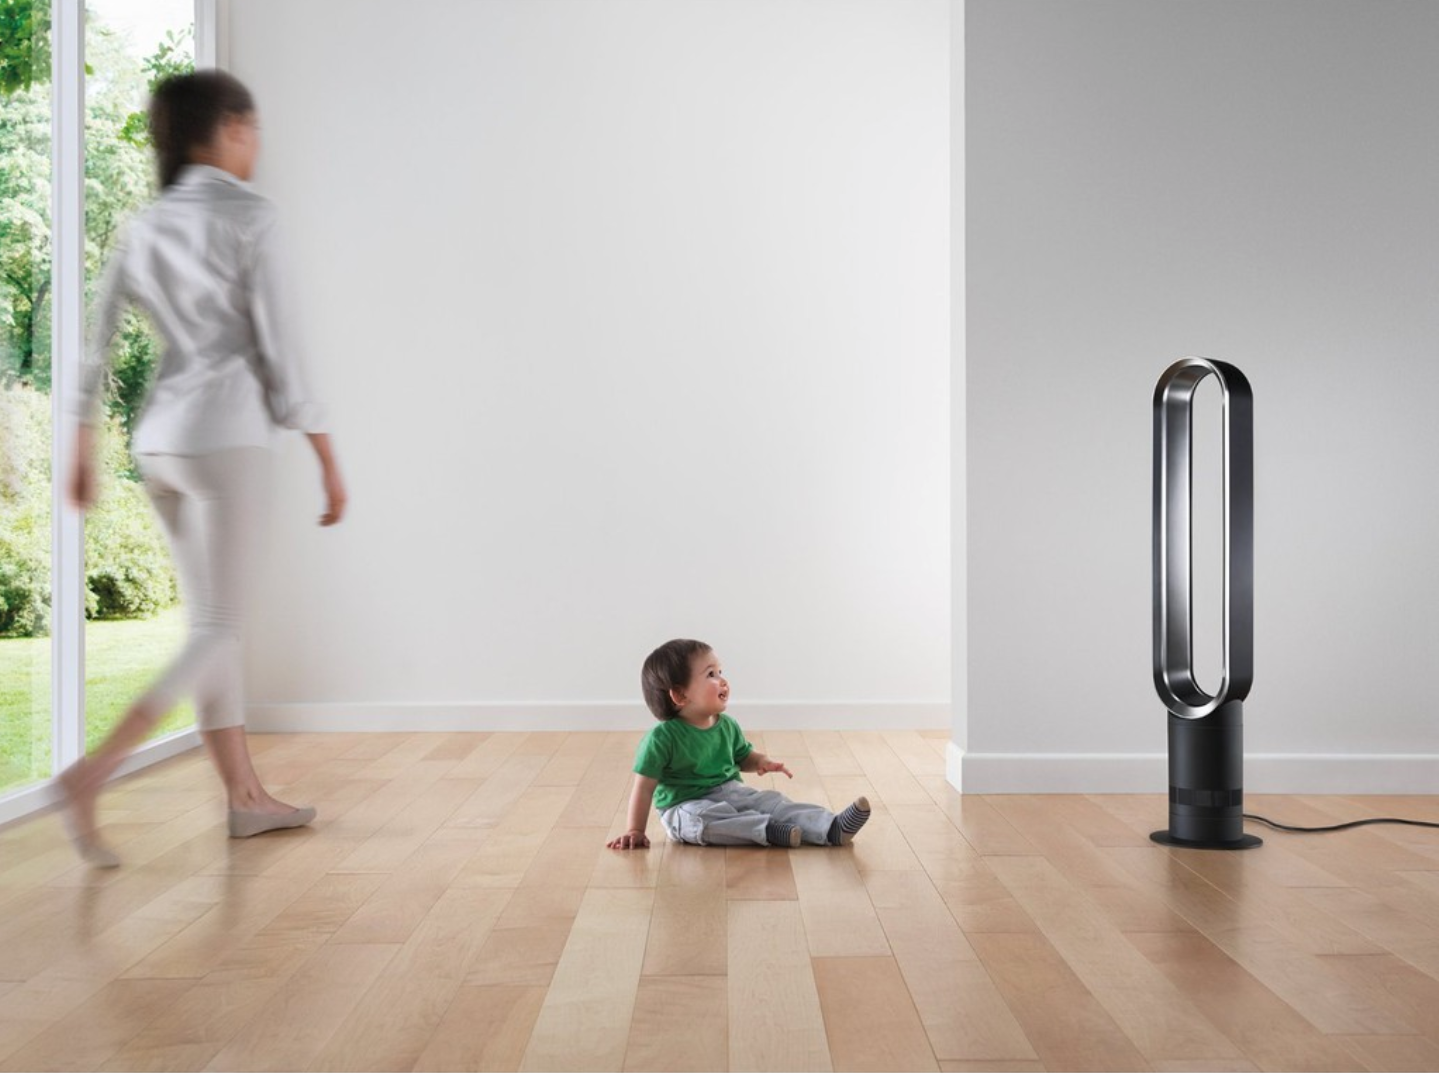 Lowest Price Ever: Dyson Bladeless Tower Fan on sale for $335. Available together with other hot-selling items on Shopee’s Lowest Price Guaranteed Big Sale from 25 – 27 Mar 2019! - 2